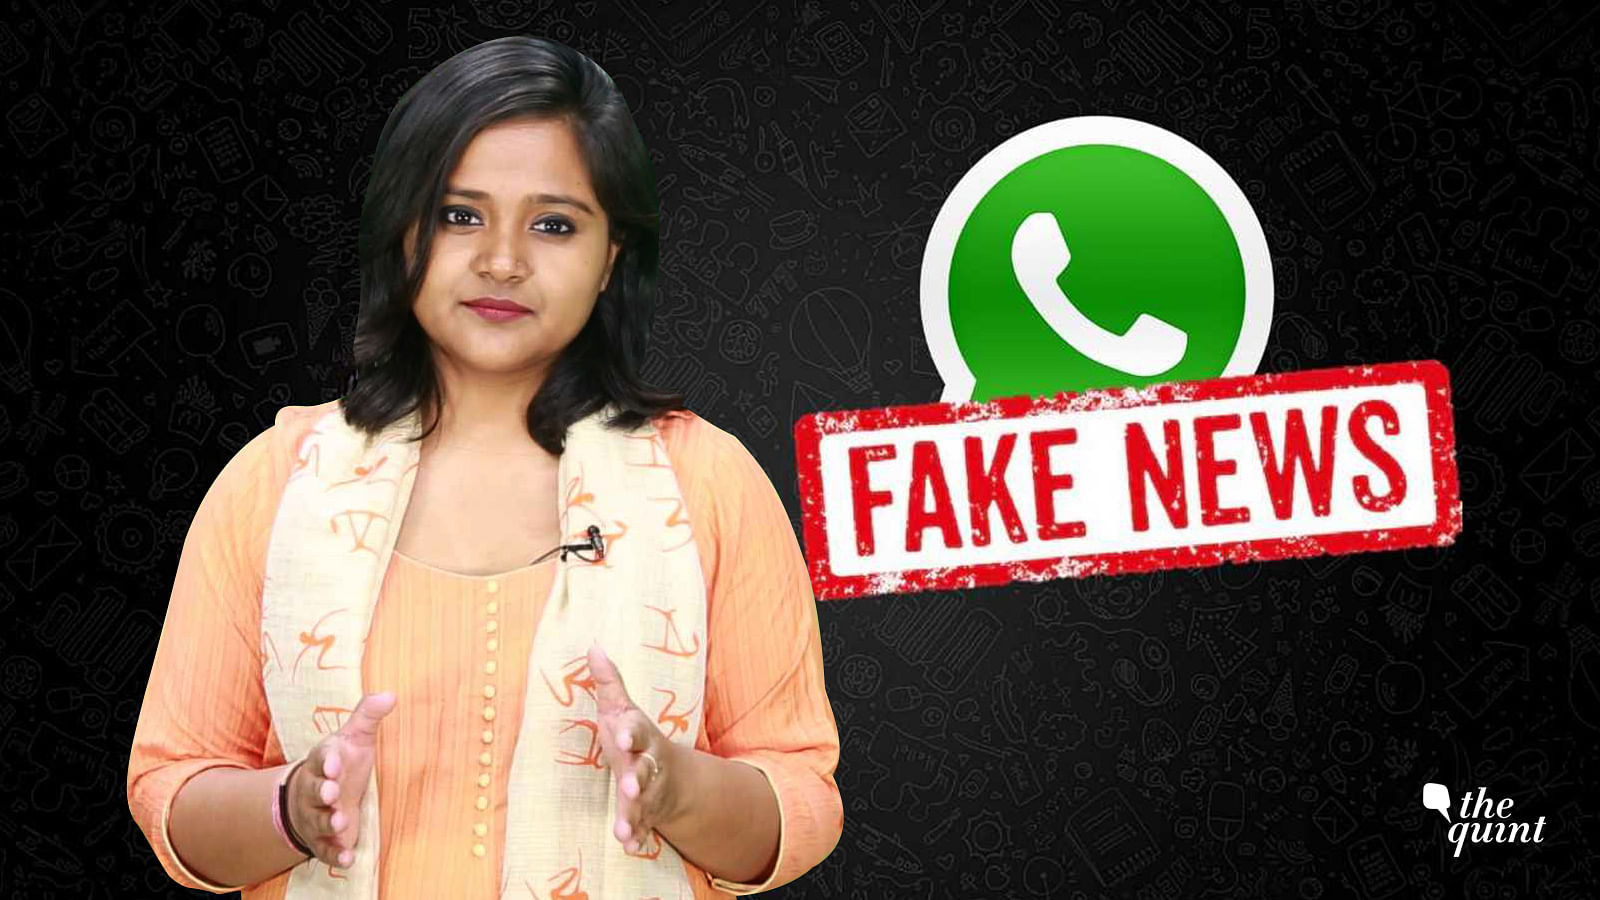 With 200 million Indians using WhatsApp, this popular messaging app has become a black hole for unchecked, unverified news.